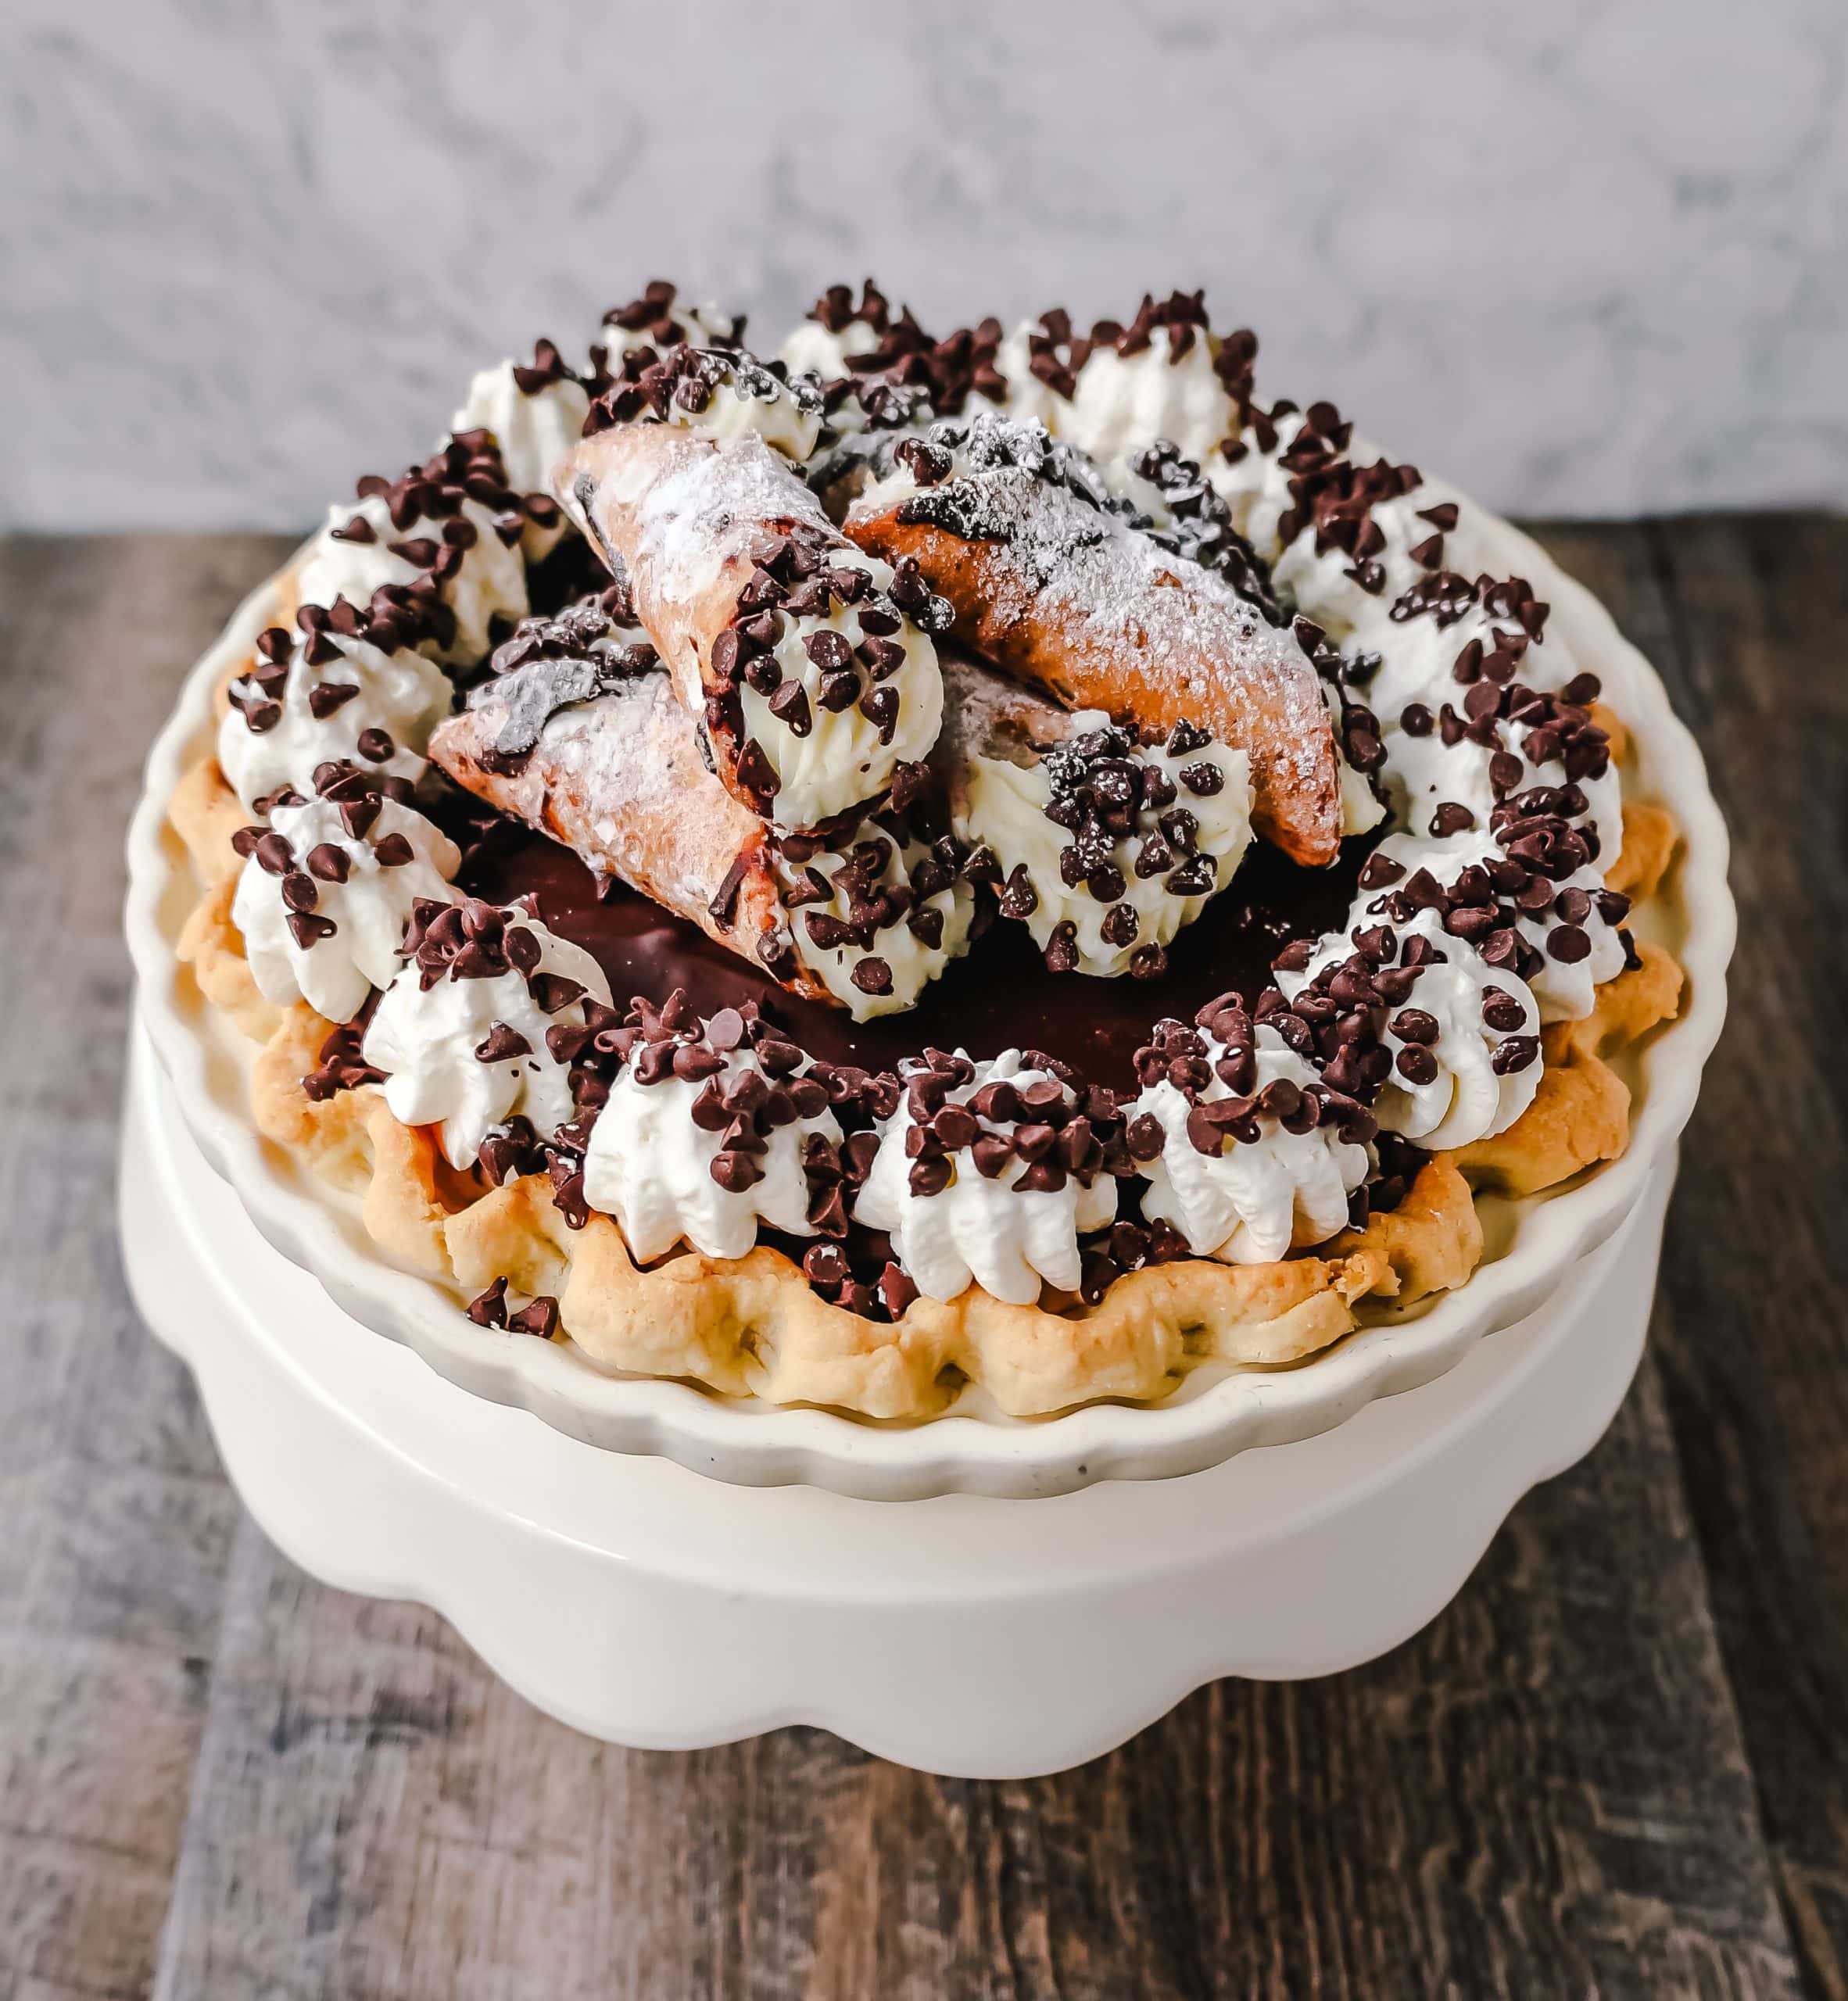 Best Cannoli Pie Recipe The popular Italian dessert -- the famous Cannoli -- but made into a pie. A creamy sweet ricotta and cream cheese filling with mini chocolate chips, topped with chocolate ganache, and freshly whipped cream.